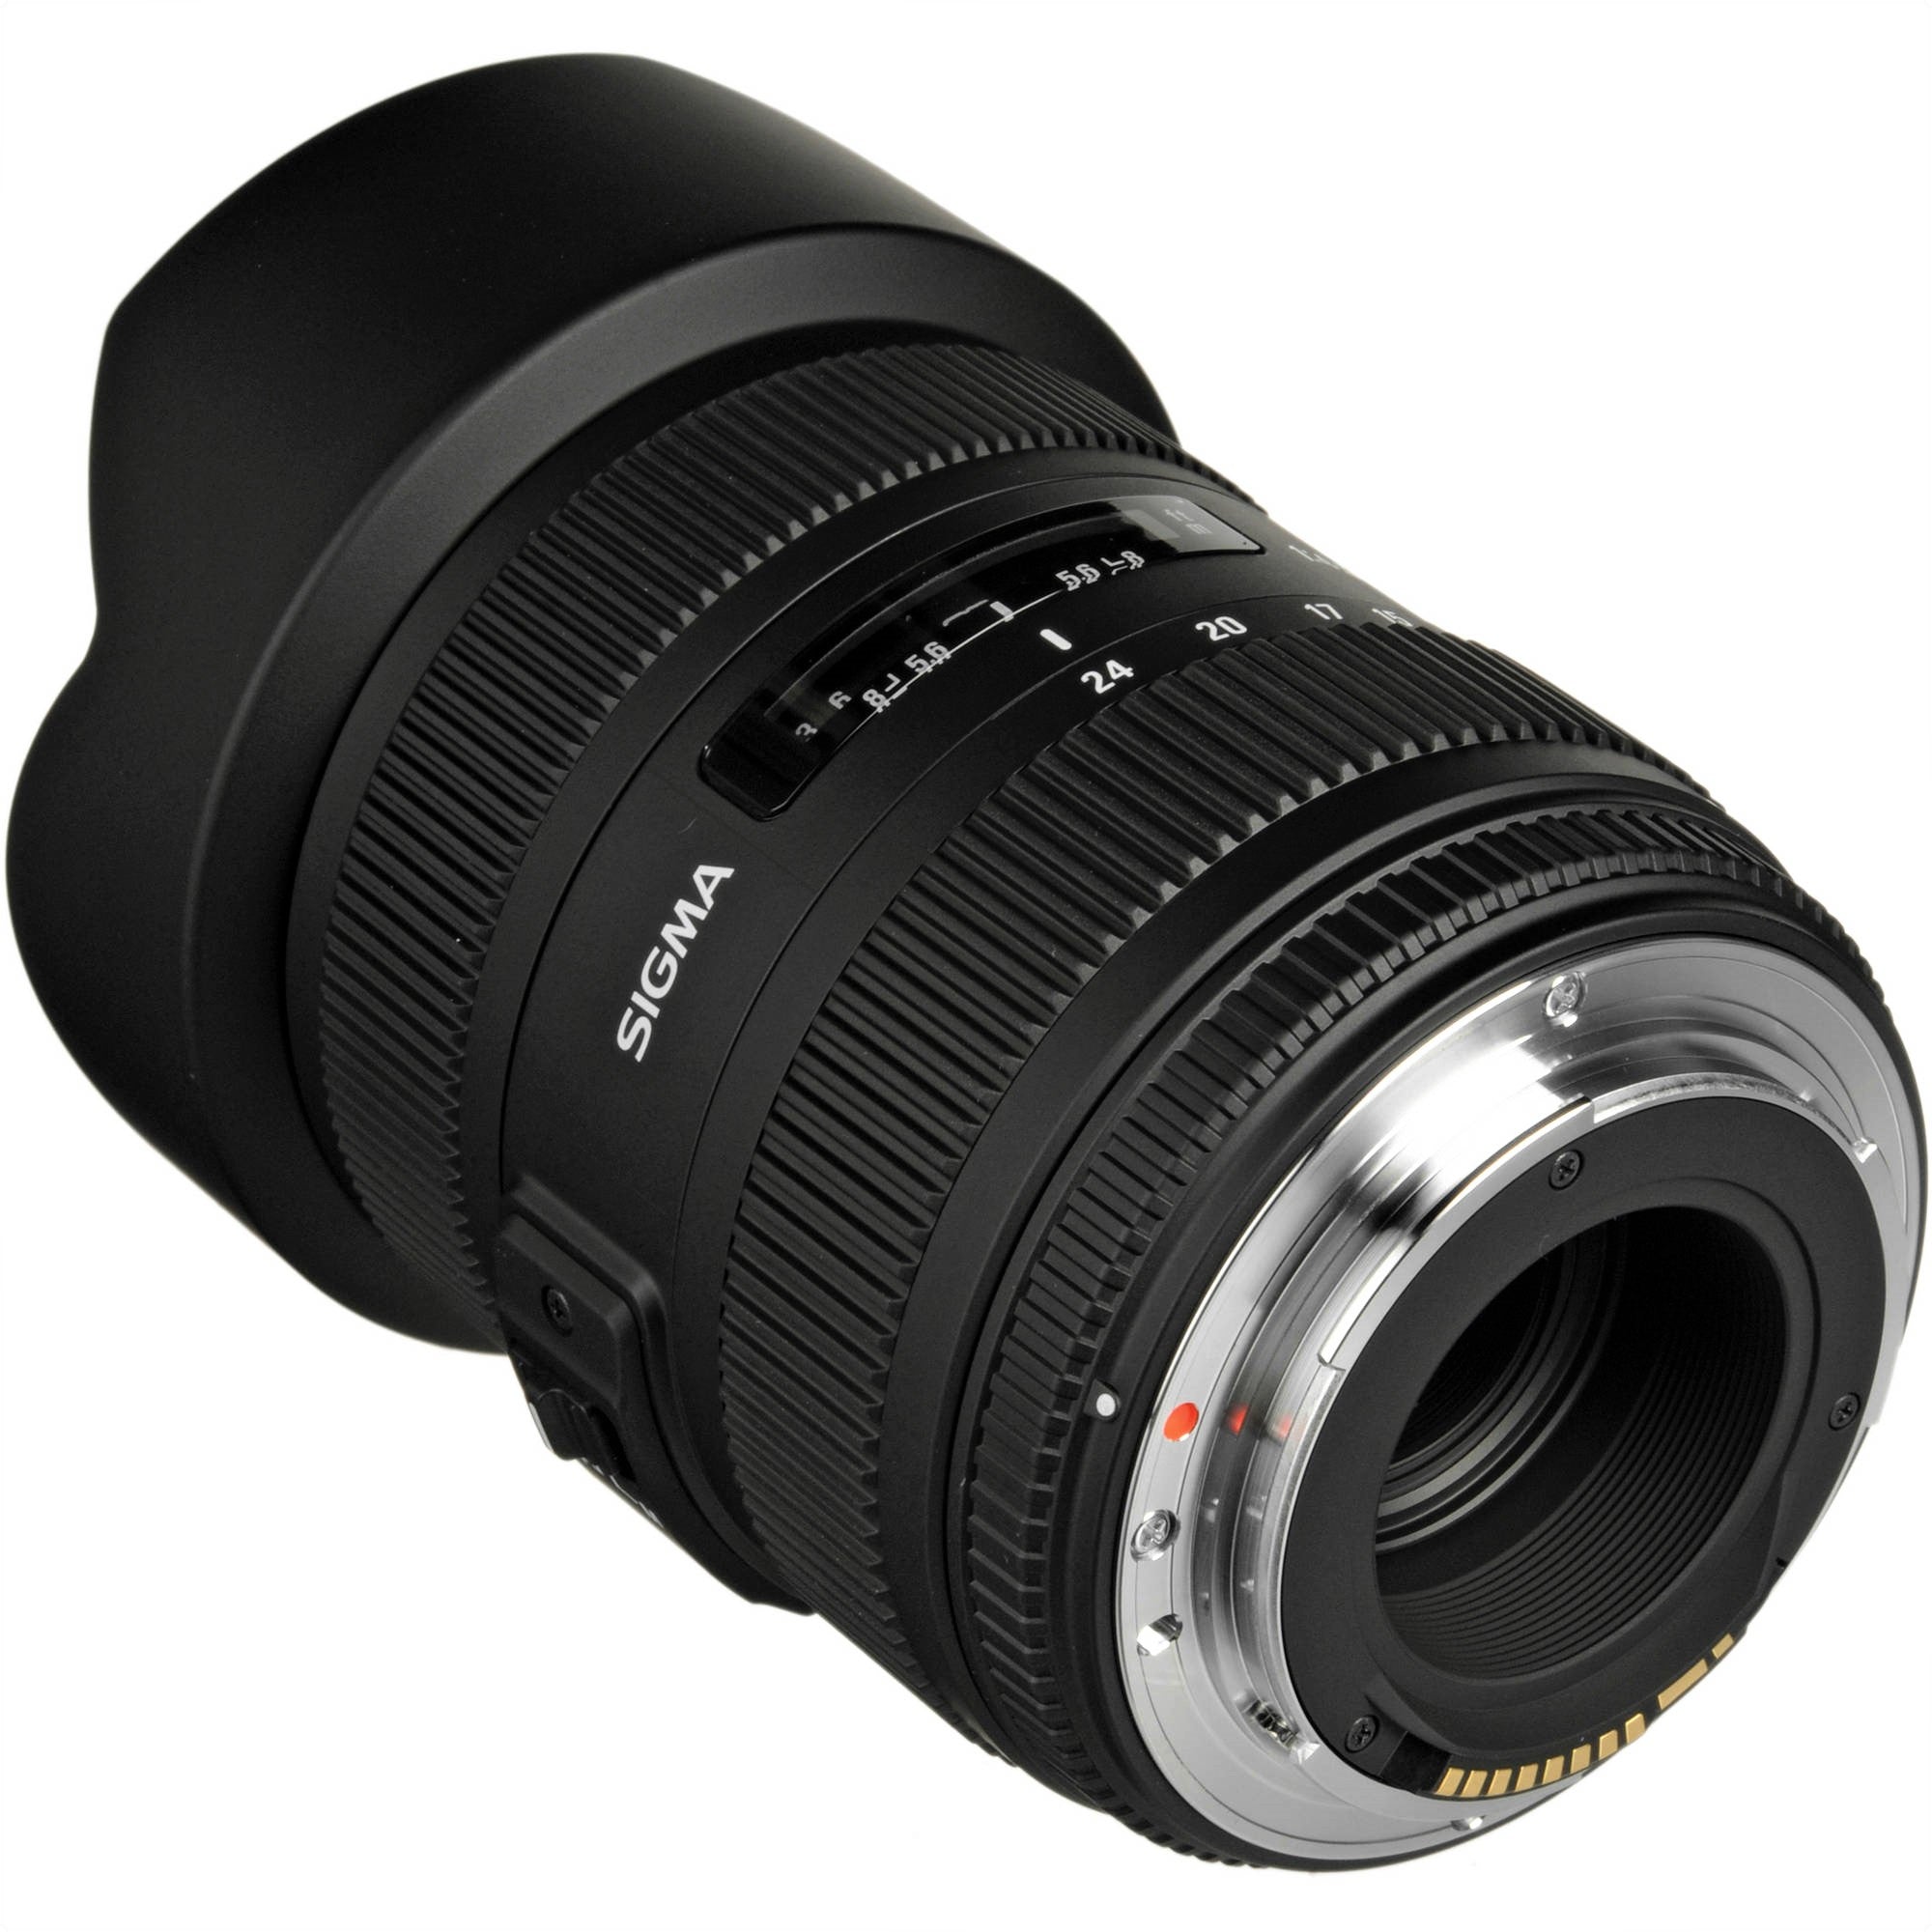 Sigma 12-24mm F4.5-5.6 II EX DG ASP-HSM Lens for Canon in a Back-Side View